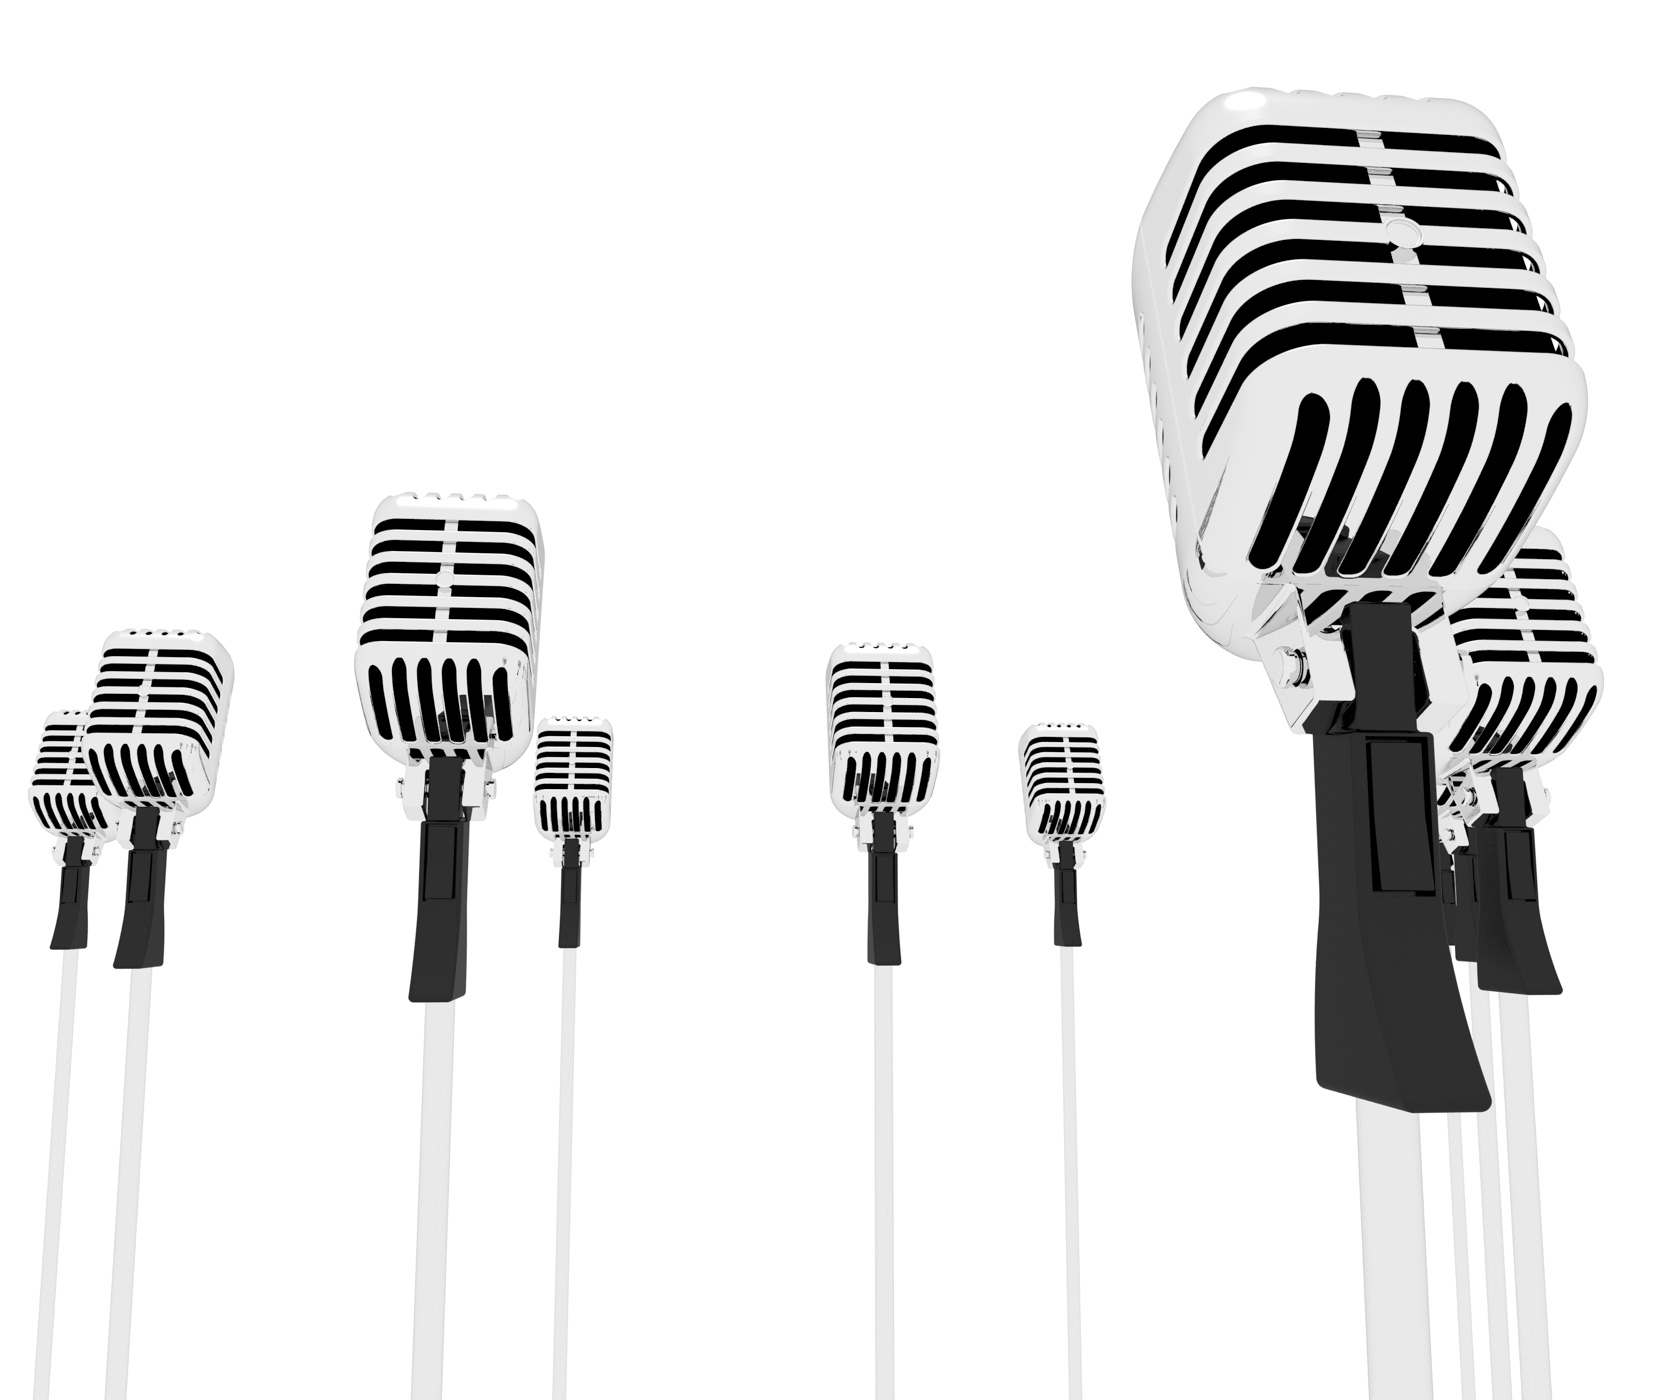 Microphones speeches shows mic music performance or performing photo